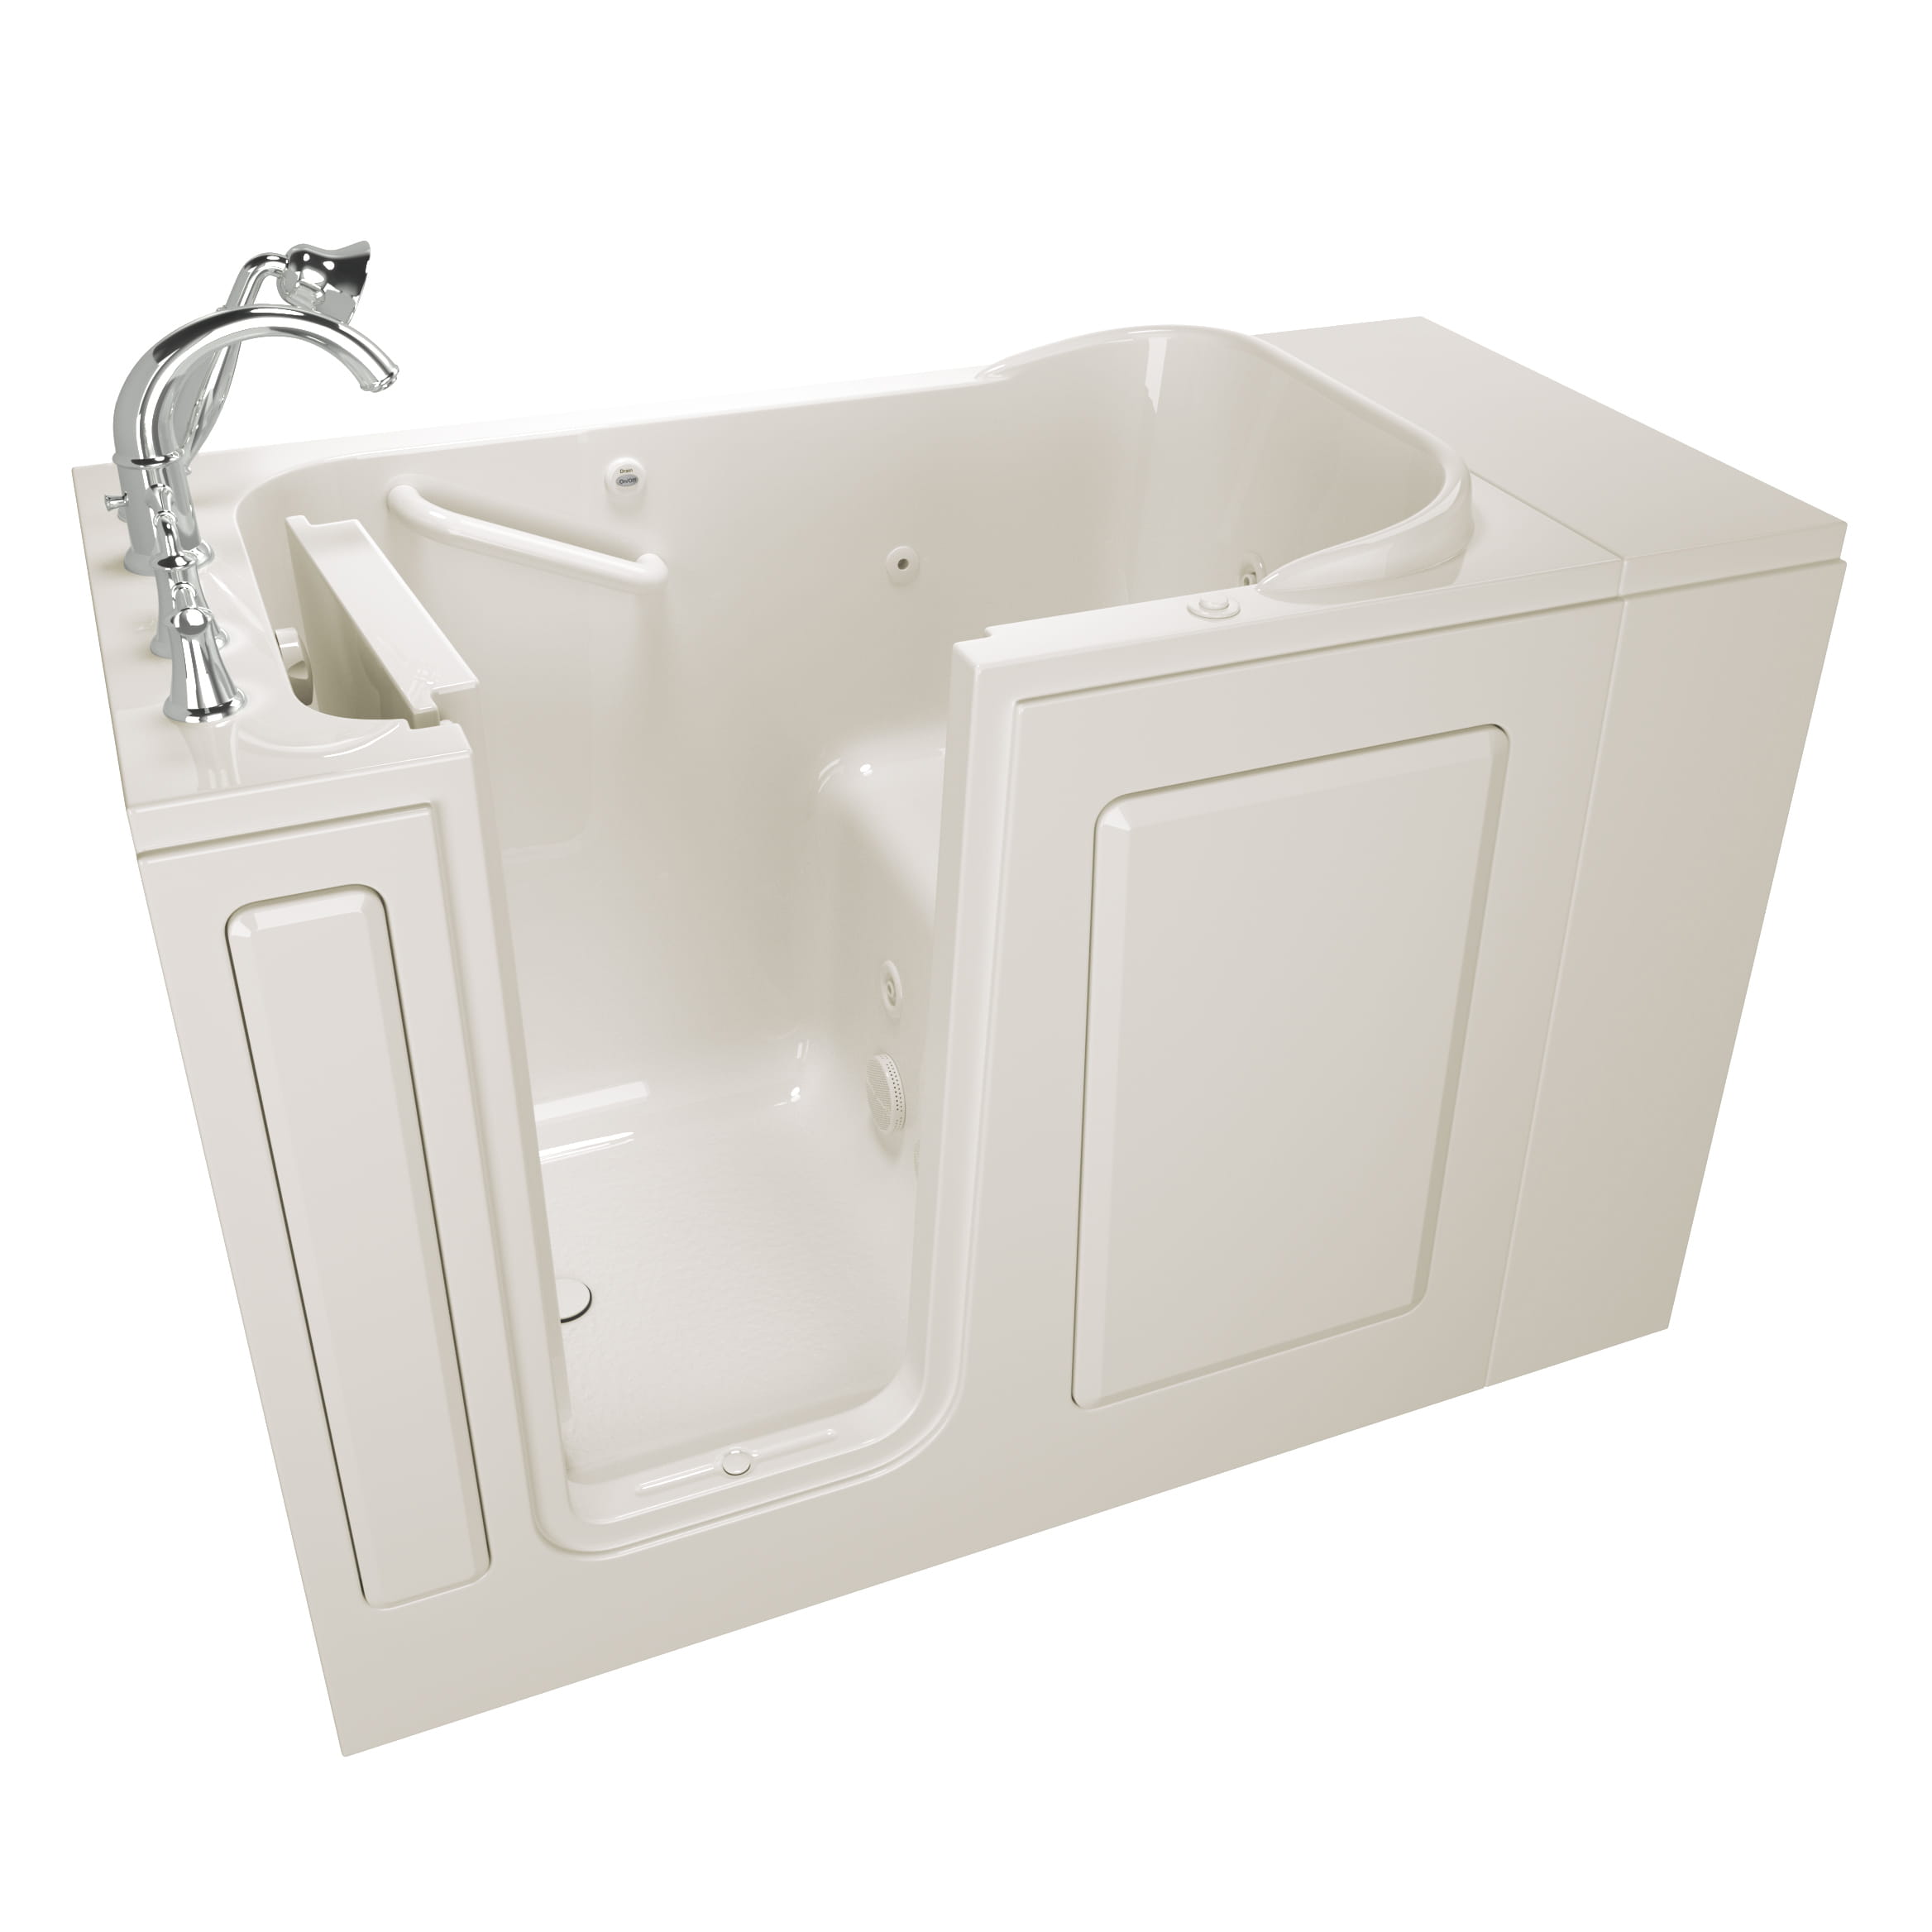 Gelcoat Value Series 28 x 48 Inch Walk in Tub With Whirlpool System   Left Hand Drain With Faucet WIB LINEN